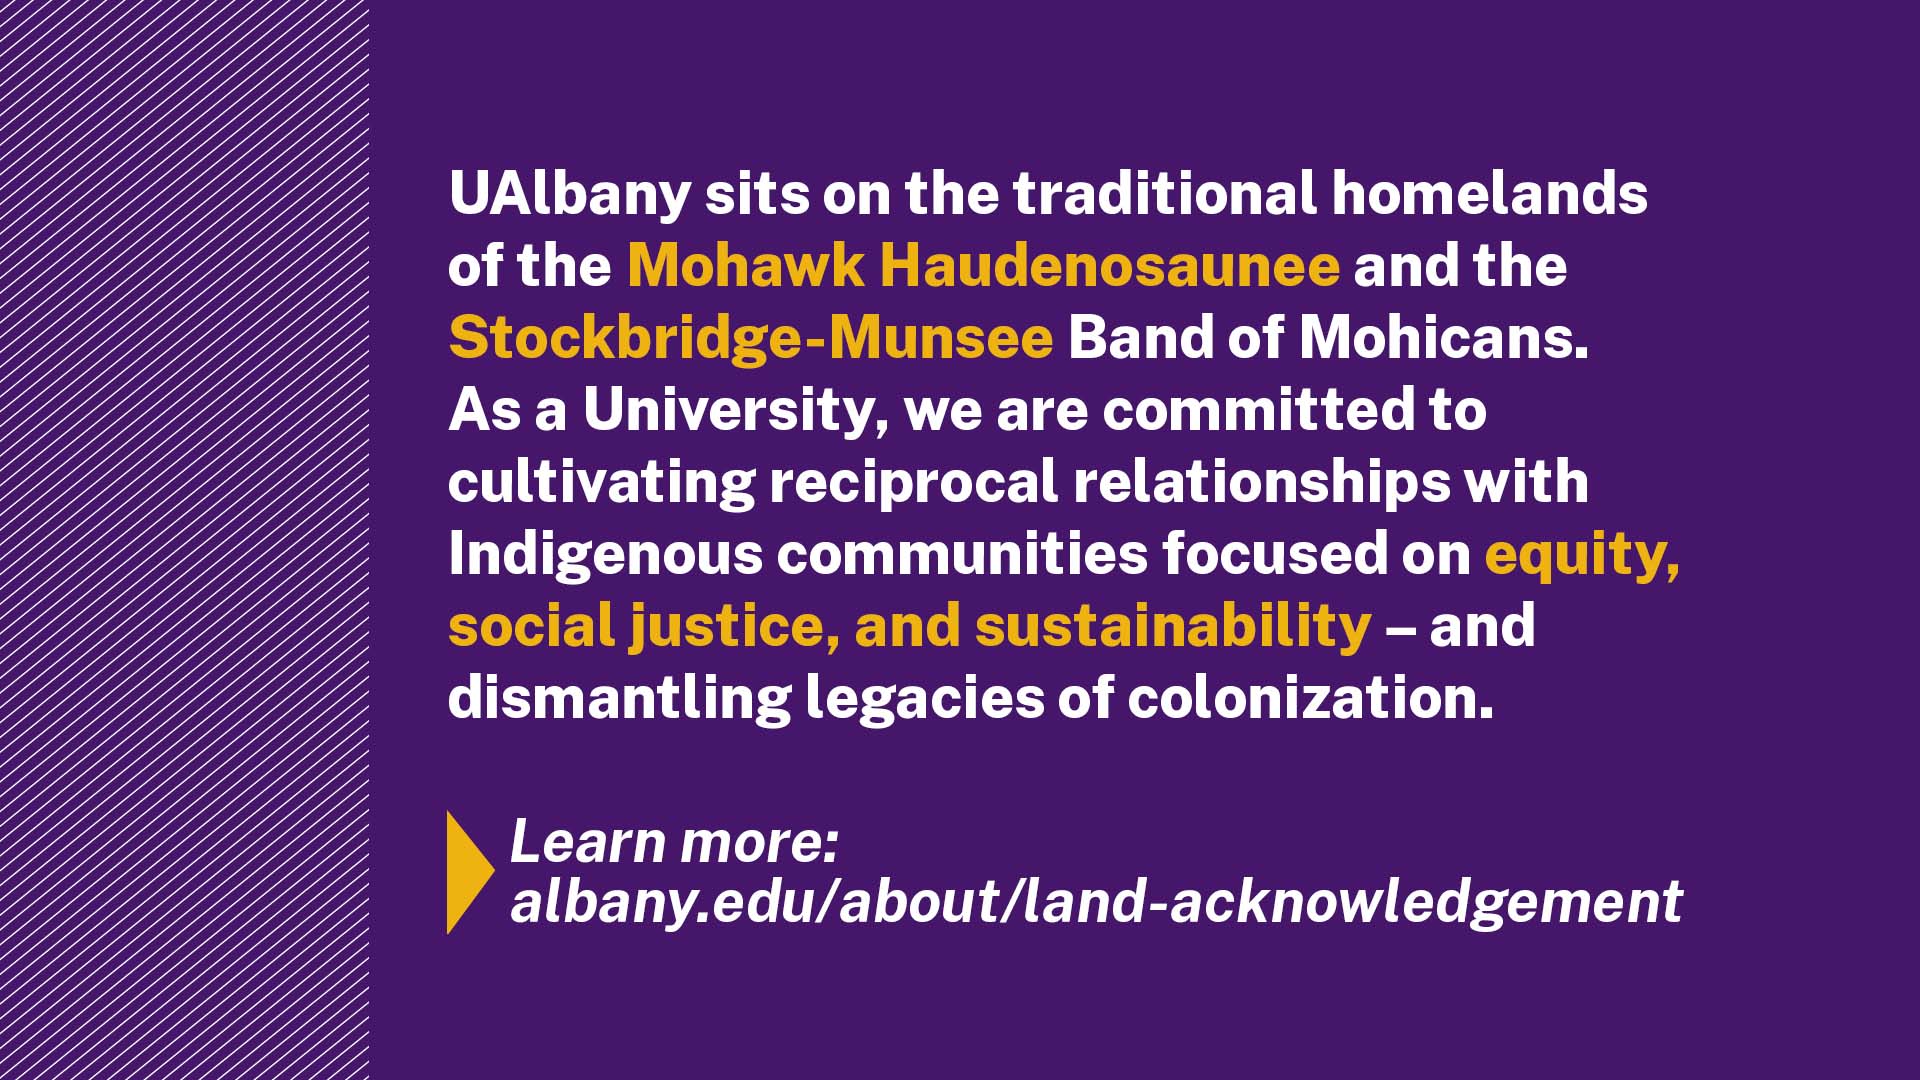 A purple slide that includes the following except from the UAlbany land acknowledgement: "UAlbany sits on the traditional homelands of the Mohawk Haudenosaunee and the Stockbridge-Munsee Band of Mohicans. As a University, we are committed to cultivating reciprocal relationships with Indigenous communities focused on equity, social justice, and sustainability — and dismantling legacies of colonization."